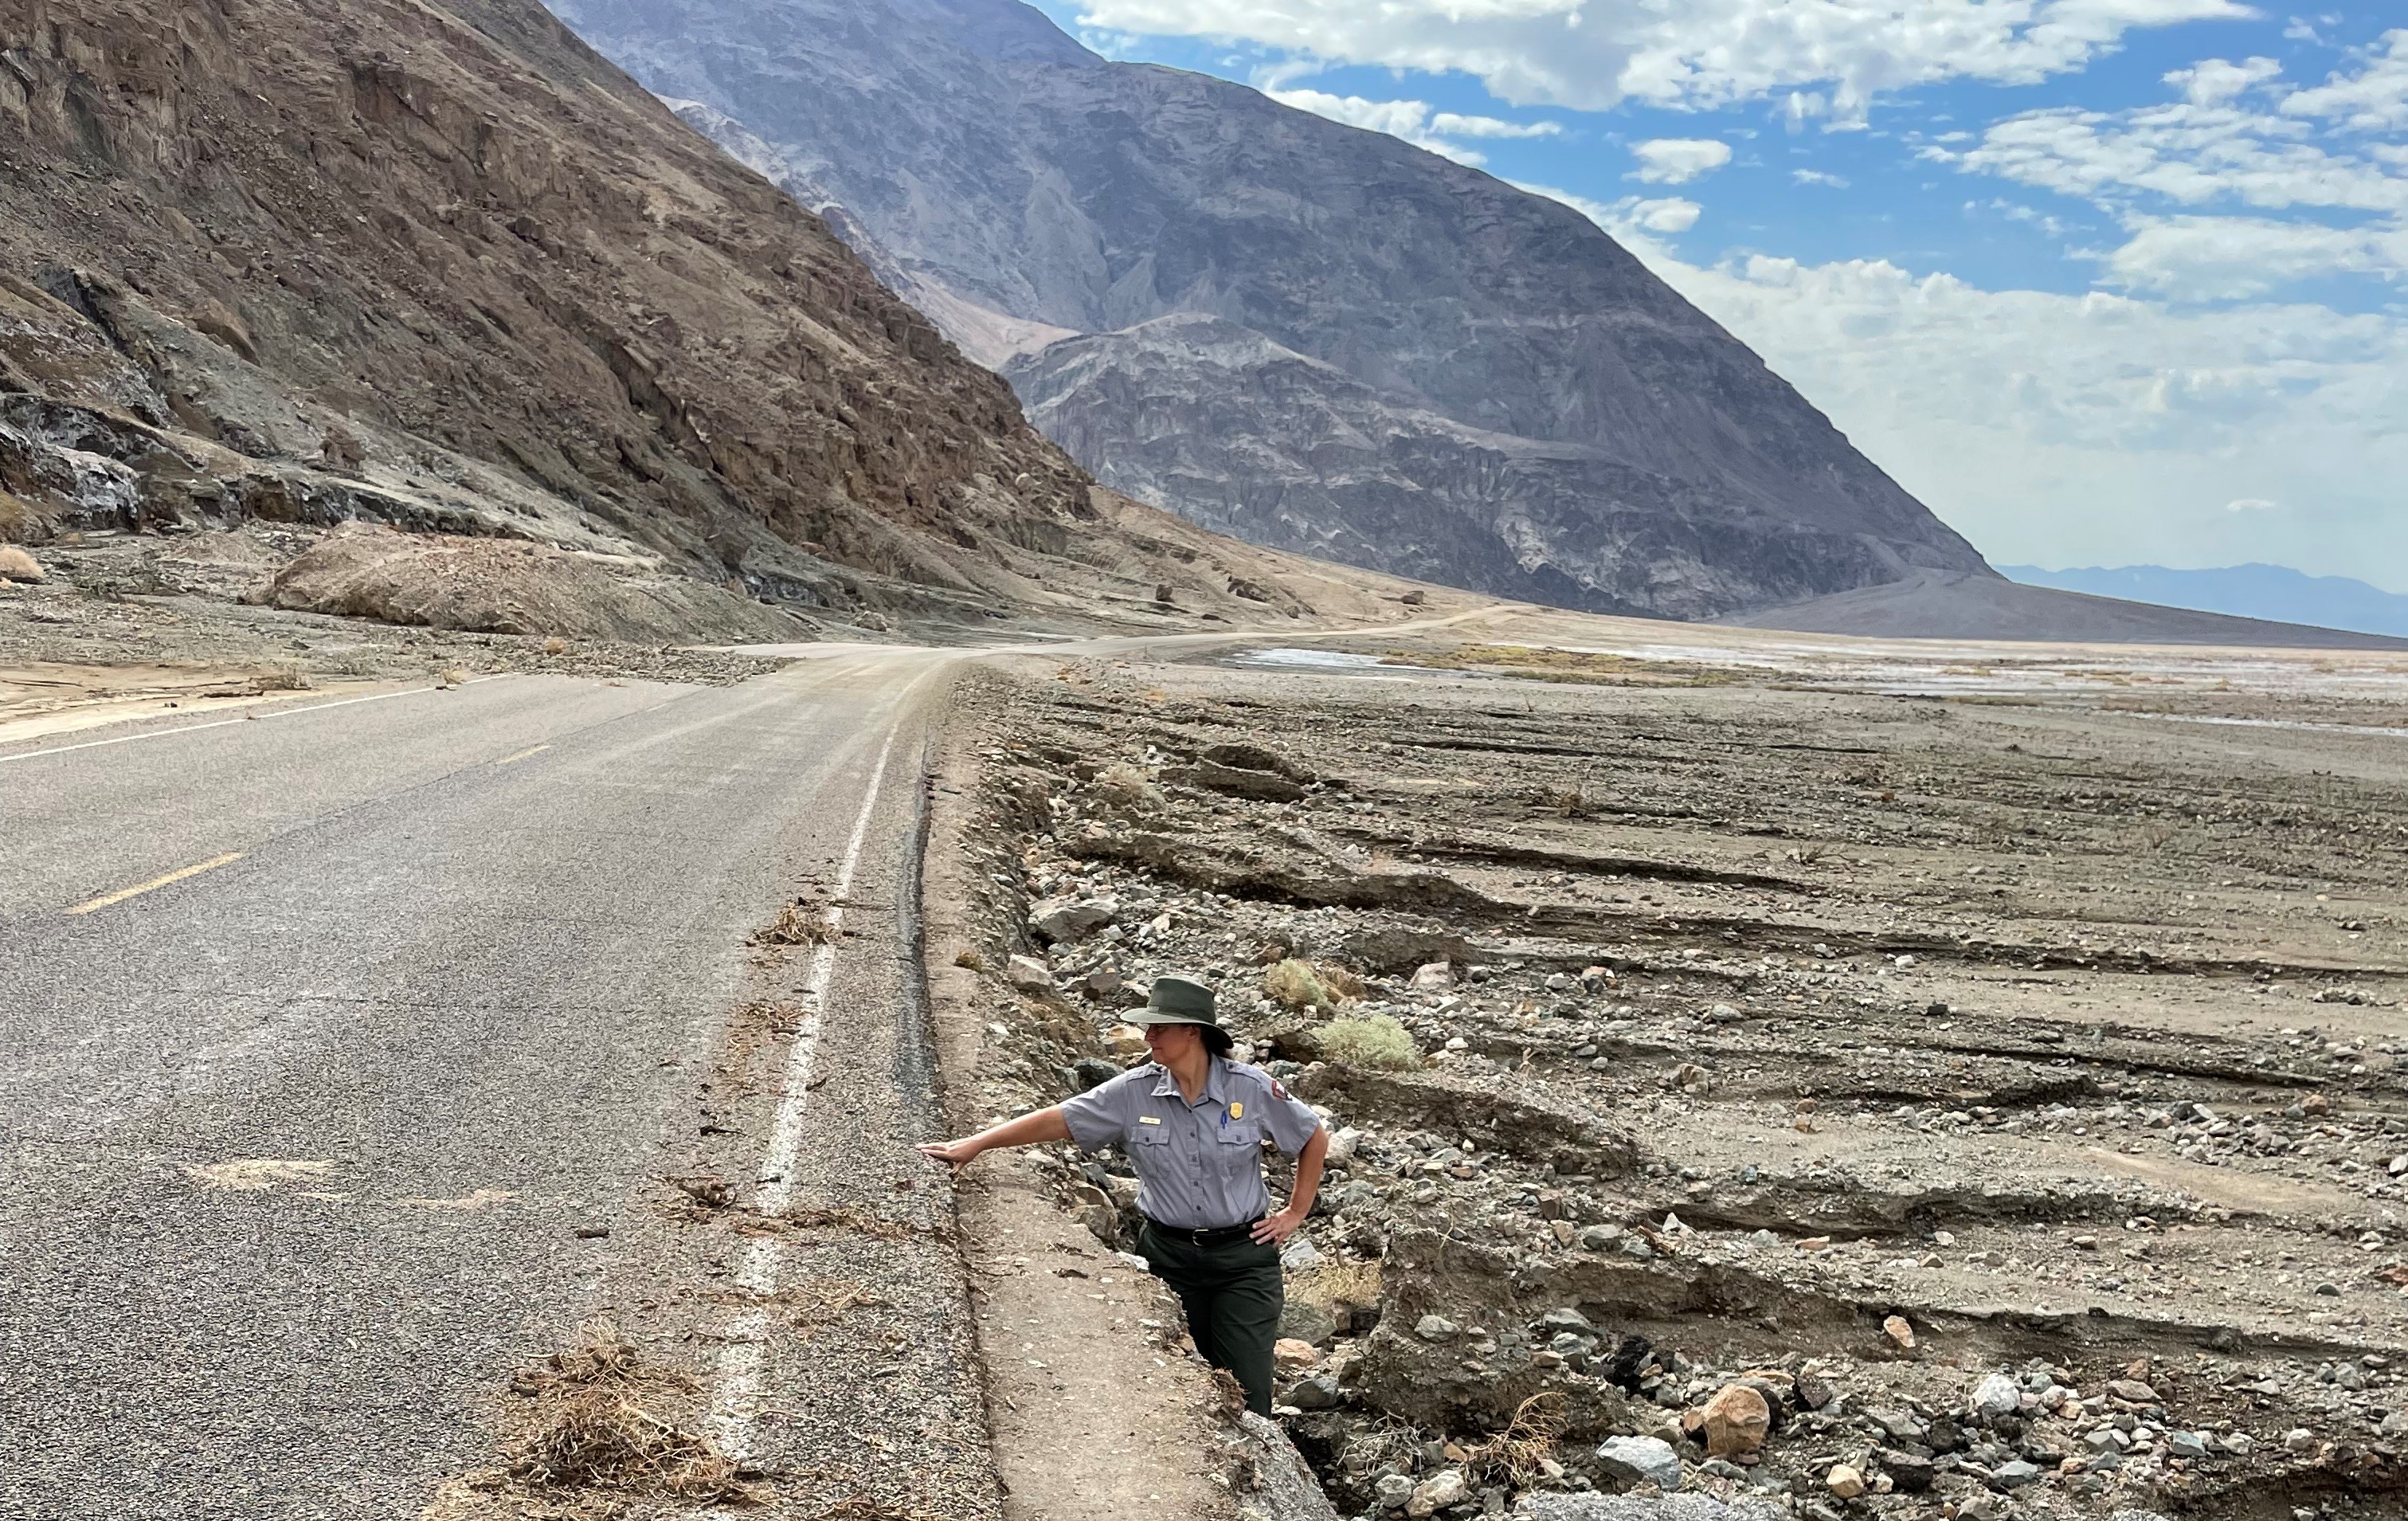 A woman in National Park Service uniform stands in an eroded road shoulder. Her arm is almost horizontal, touching the edge of the pavement.